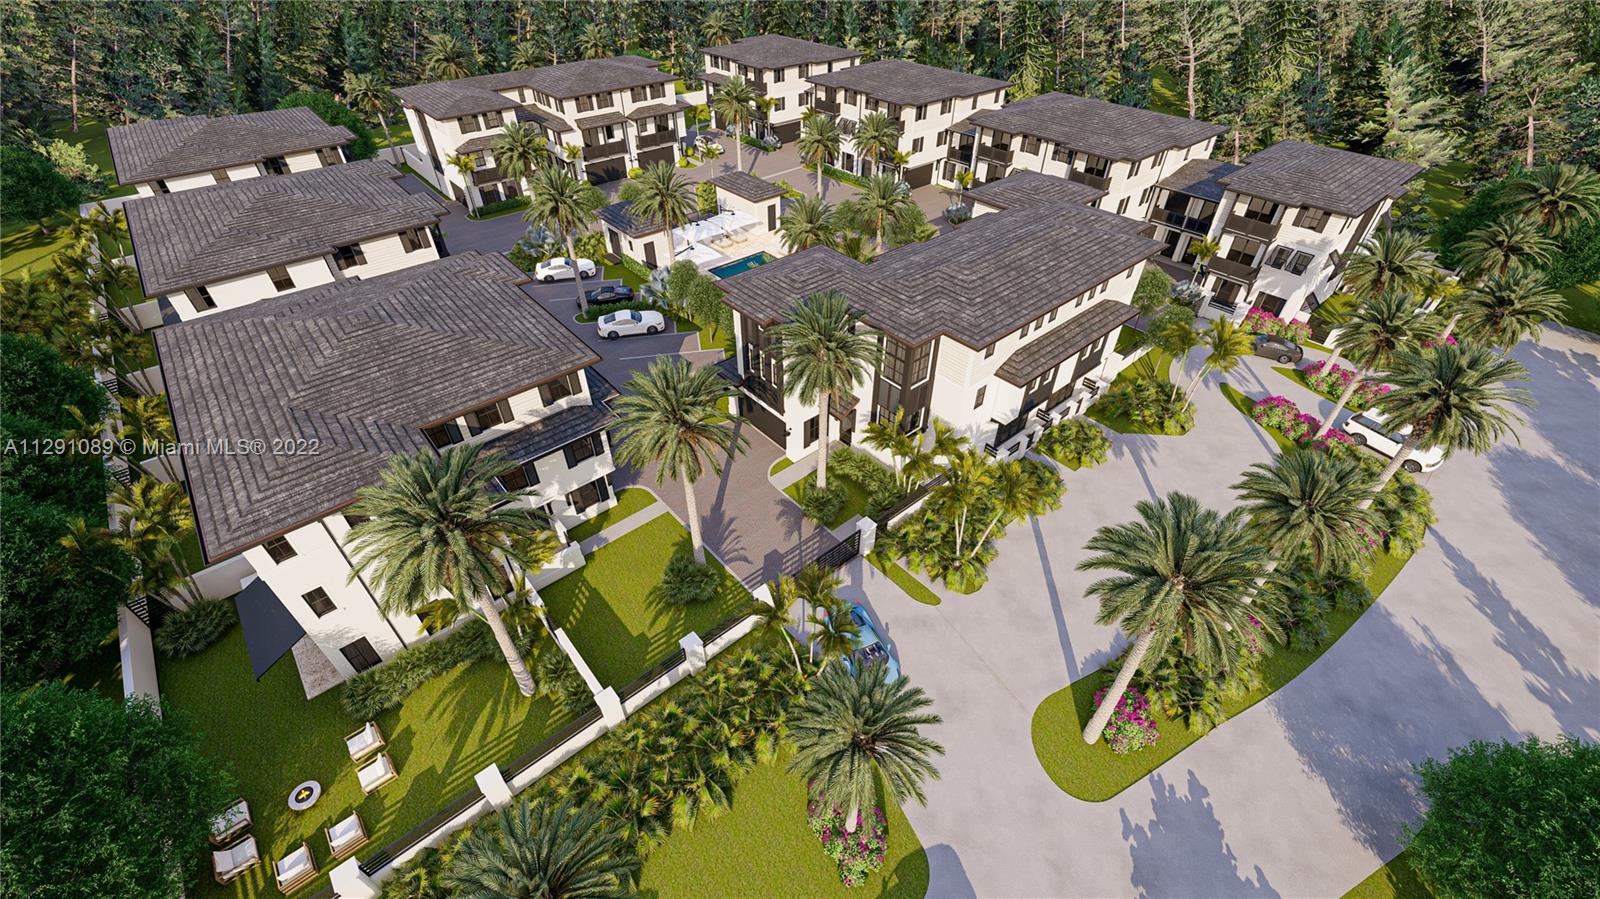 Pine Park Villas comprises only 18, 3-story townhome units in a private, gated enclave. Delivered completely finished with Mia Cucina cabinets, quartz counters, tiled throughout, elevator, 2-car garage, and private back yards. Fee-simple ownership allows for low HOA fees in Pinecrest's most convenient location.